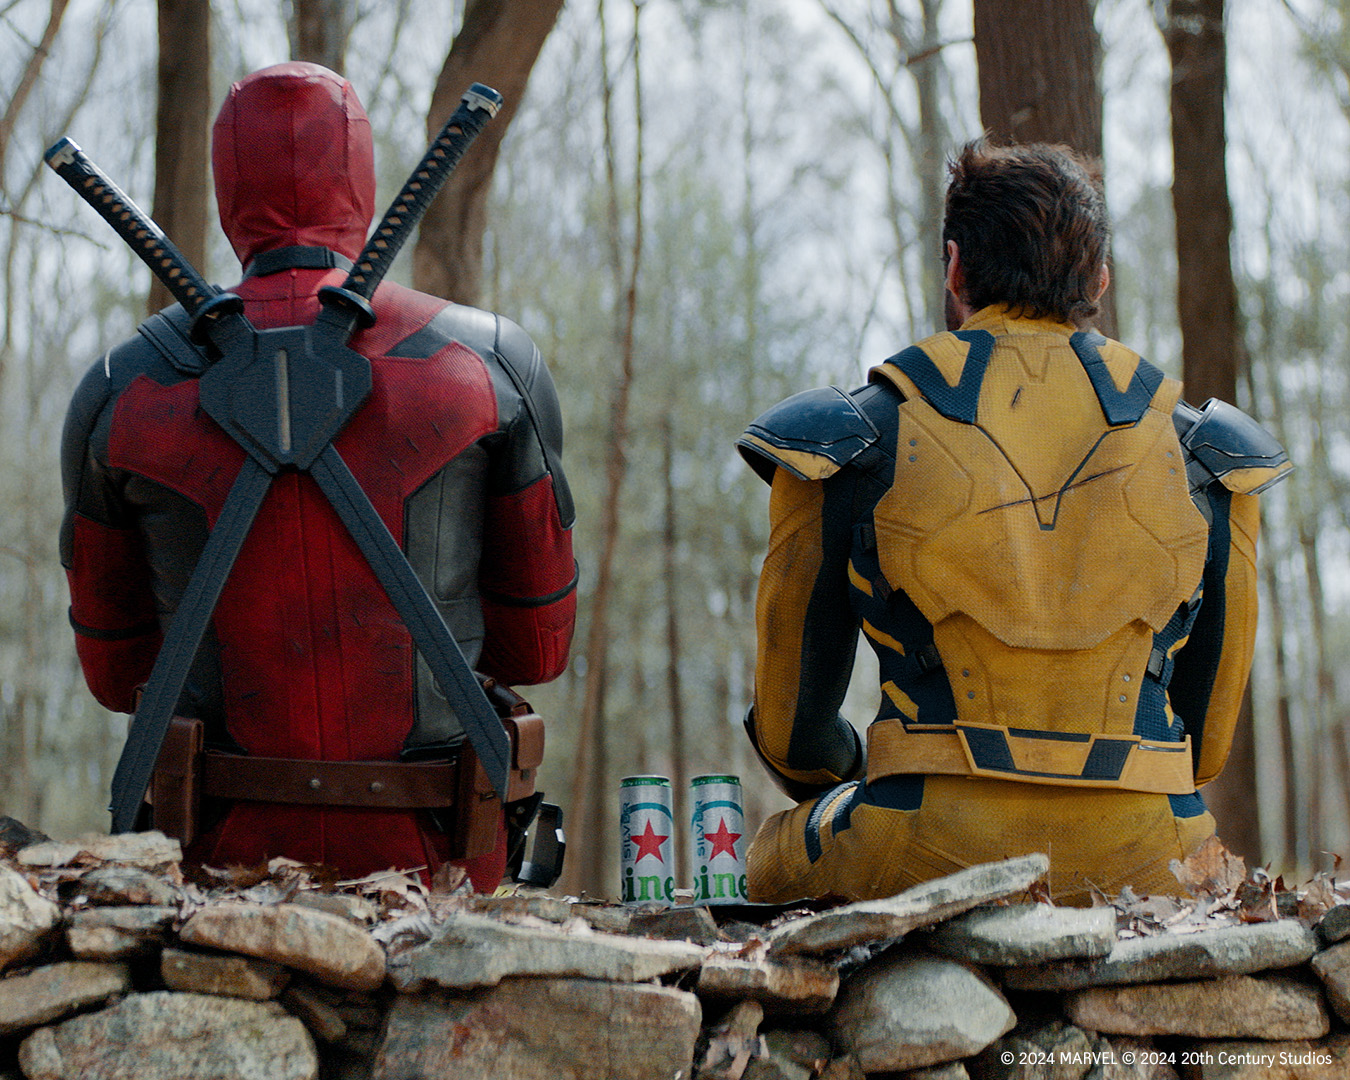 Heineken Silver Teams Up with “Deadpool & Wolverine” for New Summer Campaign